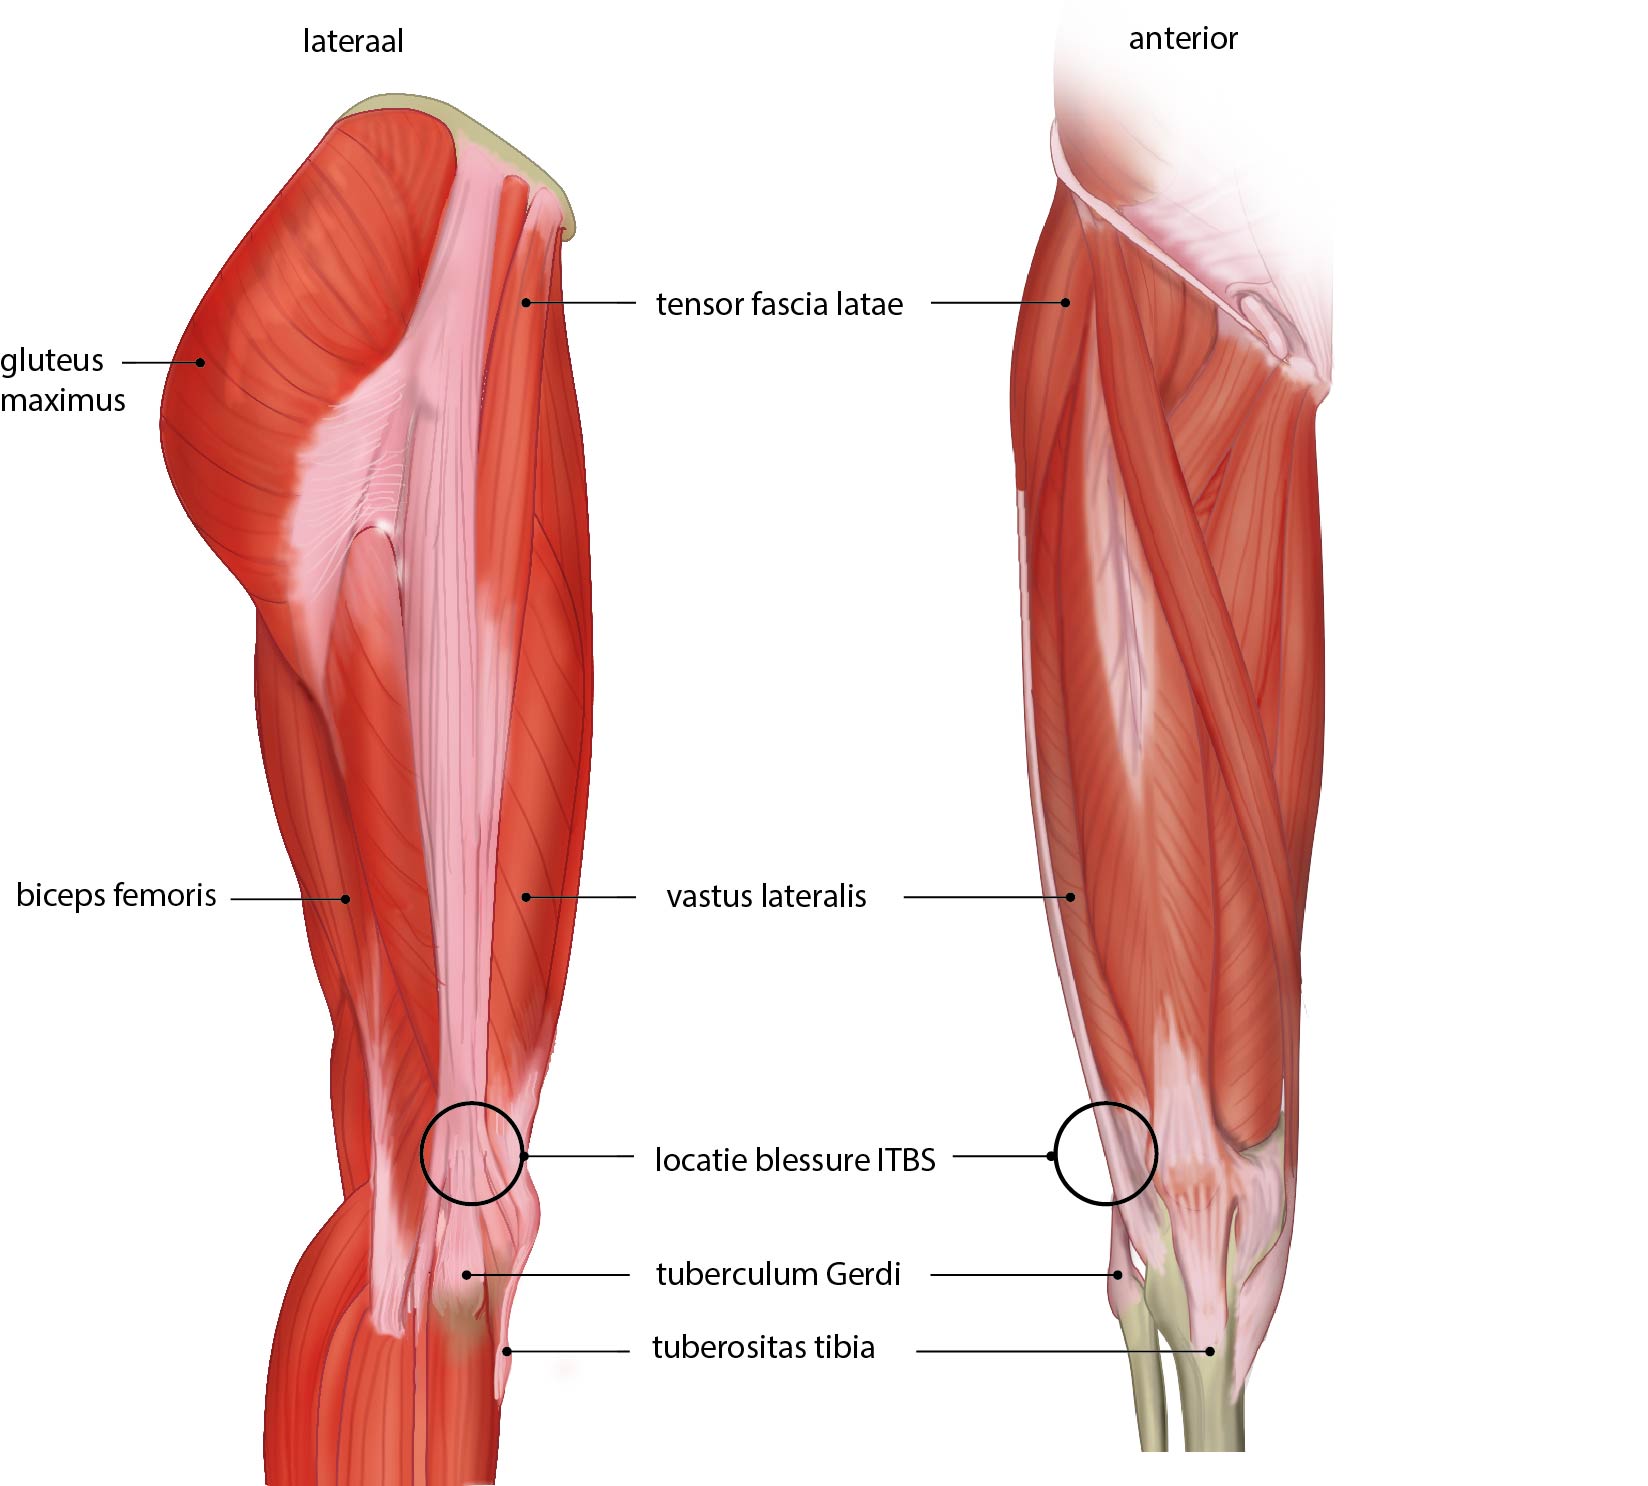 Slagter - Drawing Lateral and anterior view of muscles of thigh and  location Iliotibial band syndrome - Dutch labels